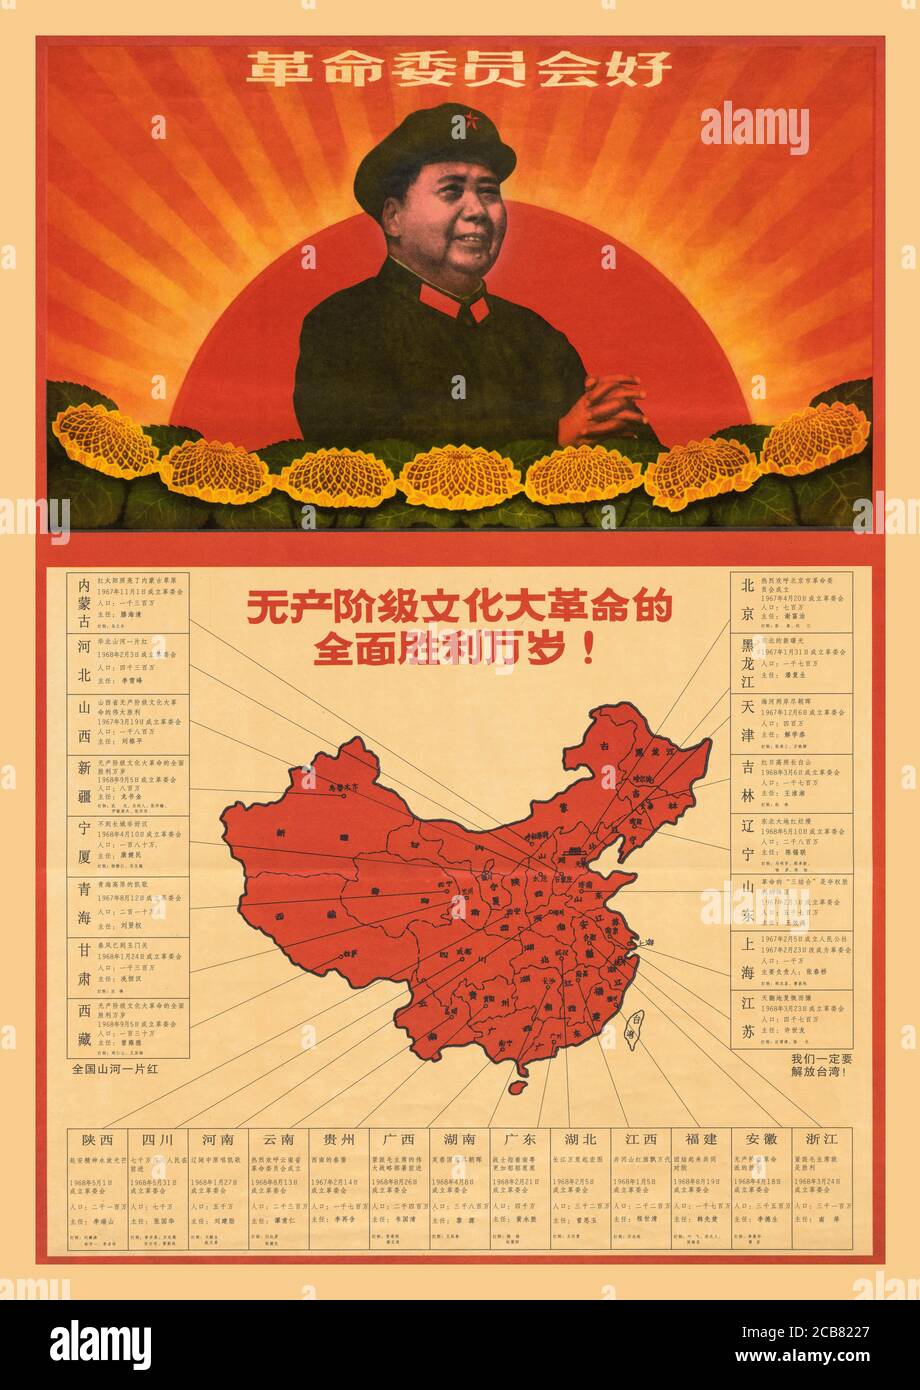 Vintage 1960’s China Chinese Cultural Revolution Propaganda poster map celebrating September 5, 1968, when mass 'Seize Power' movement of the Cultural Revolution succeeded replacing of established governments by 'Revolutionary Committees' in the last two of China's 29 administrative regions, the provinces of Tibet and Xinjiang. In the 'January Storm' of 1967, forces of the Cultural Revolution overthrew the Shanghai government replacing with a 'People's Commune.' Chairman Mao's subsequent endorsement of the overthrow began a violent movement of mass revolutionary organizations to 'Seize Power' Stock Photo